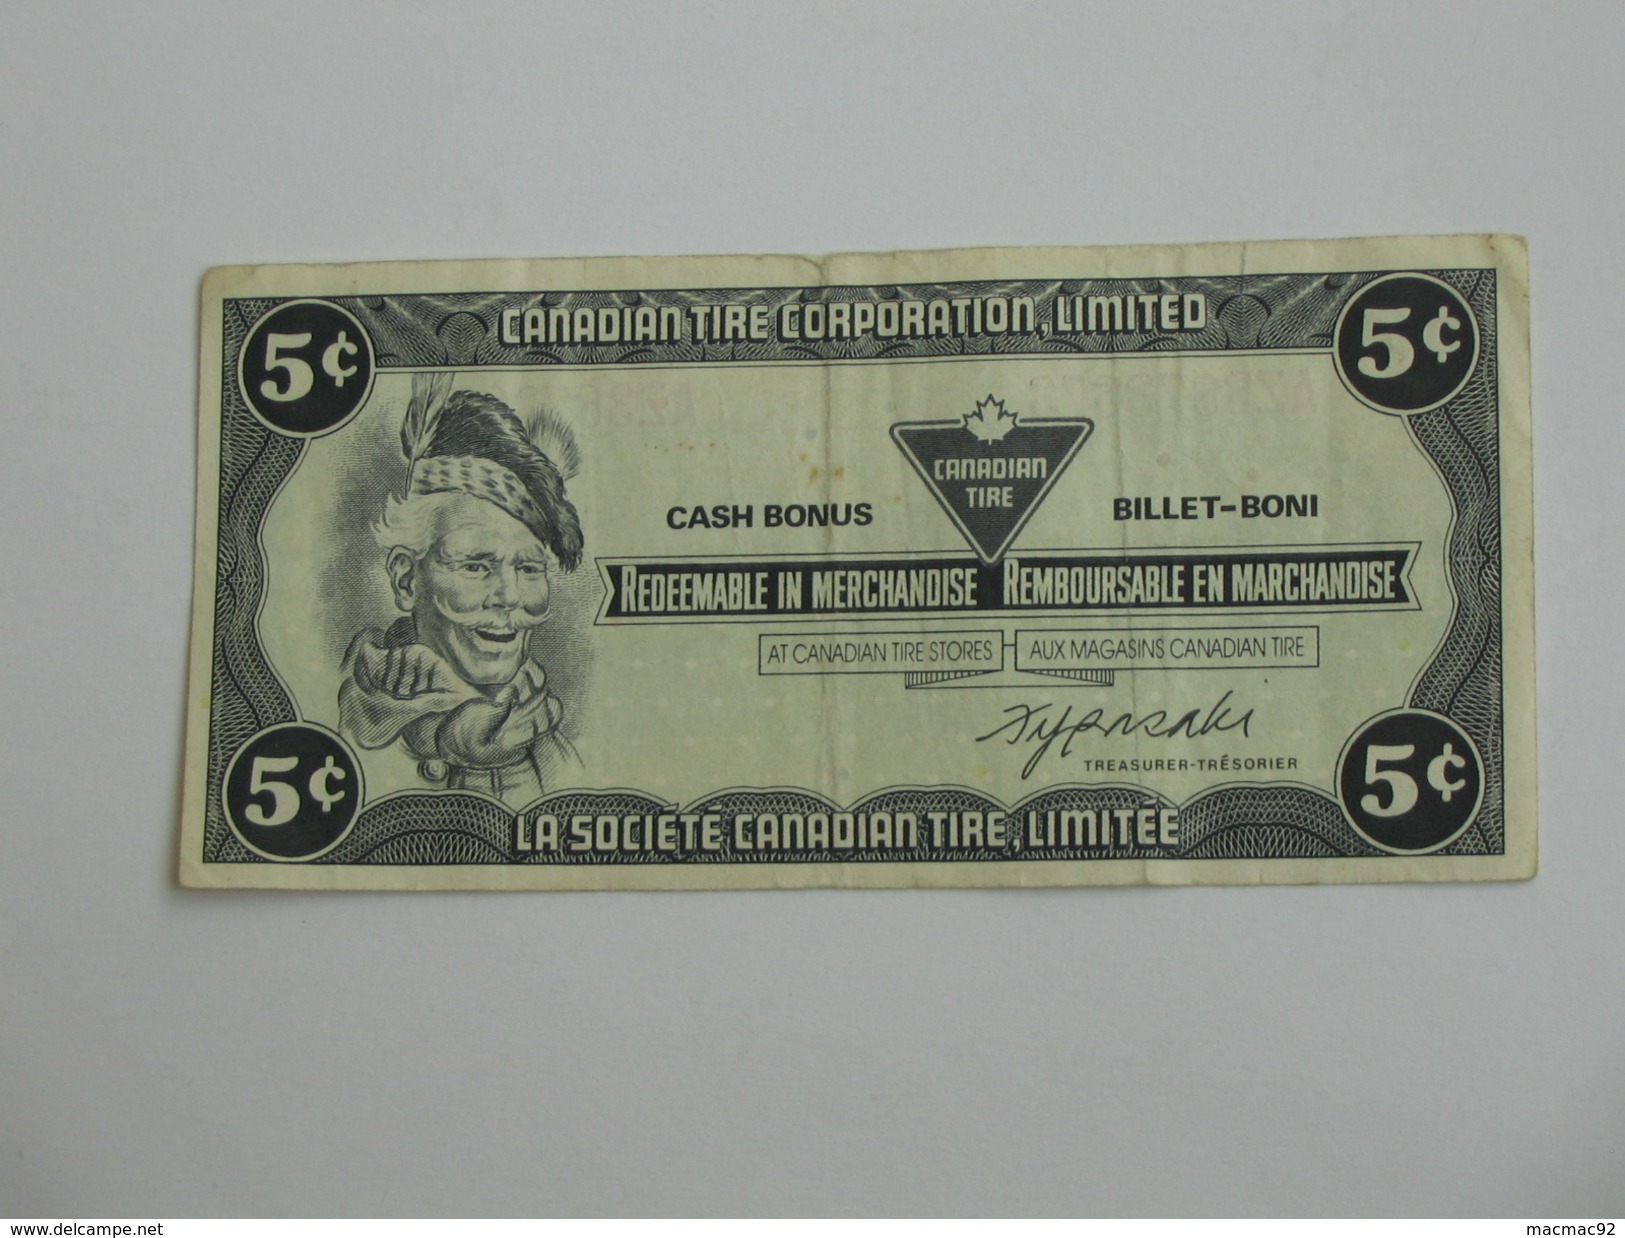 5 Cents - CANADIAN TIRE CORPORATION, LIMITED -  1985    **** EN ACHAT IMMEDIAT **** - Canada